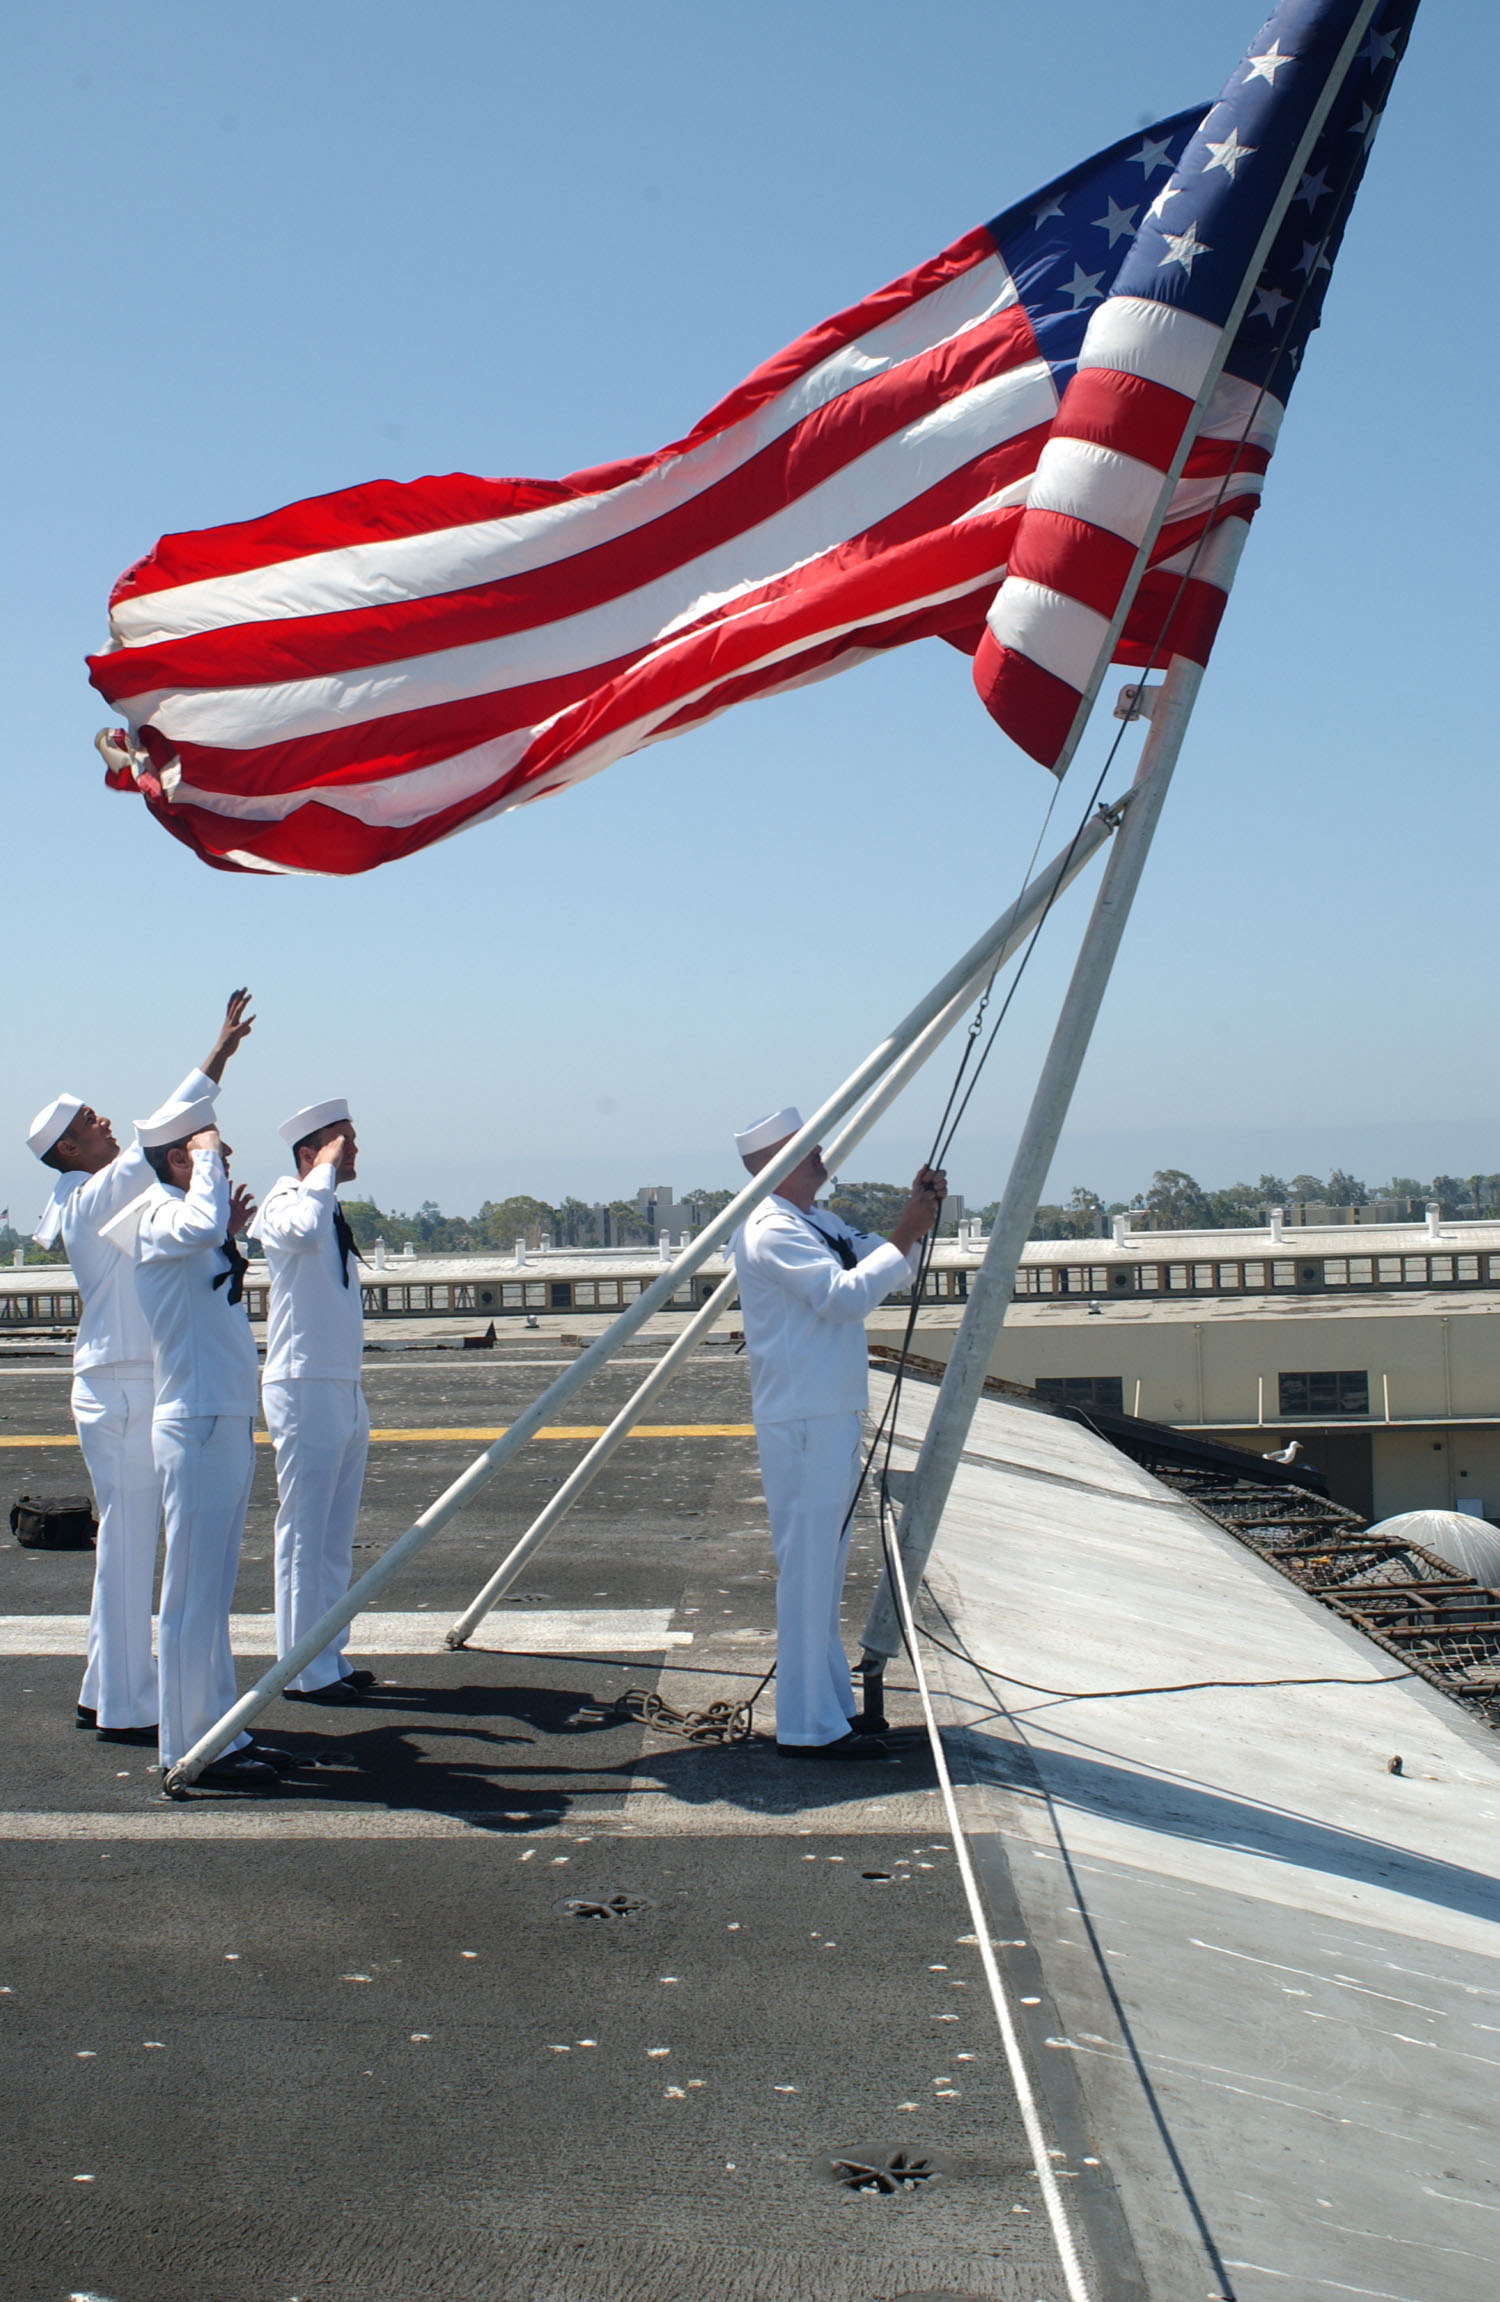 US Navy 030807-N-1356A-003 Sailors aboard USS Constellation (CV 64) lower the colors for the last time during the ships decommissioning ceremony